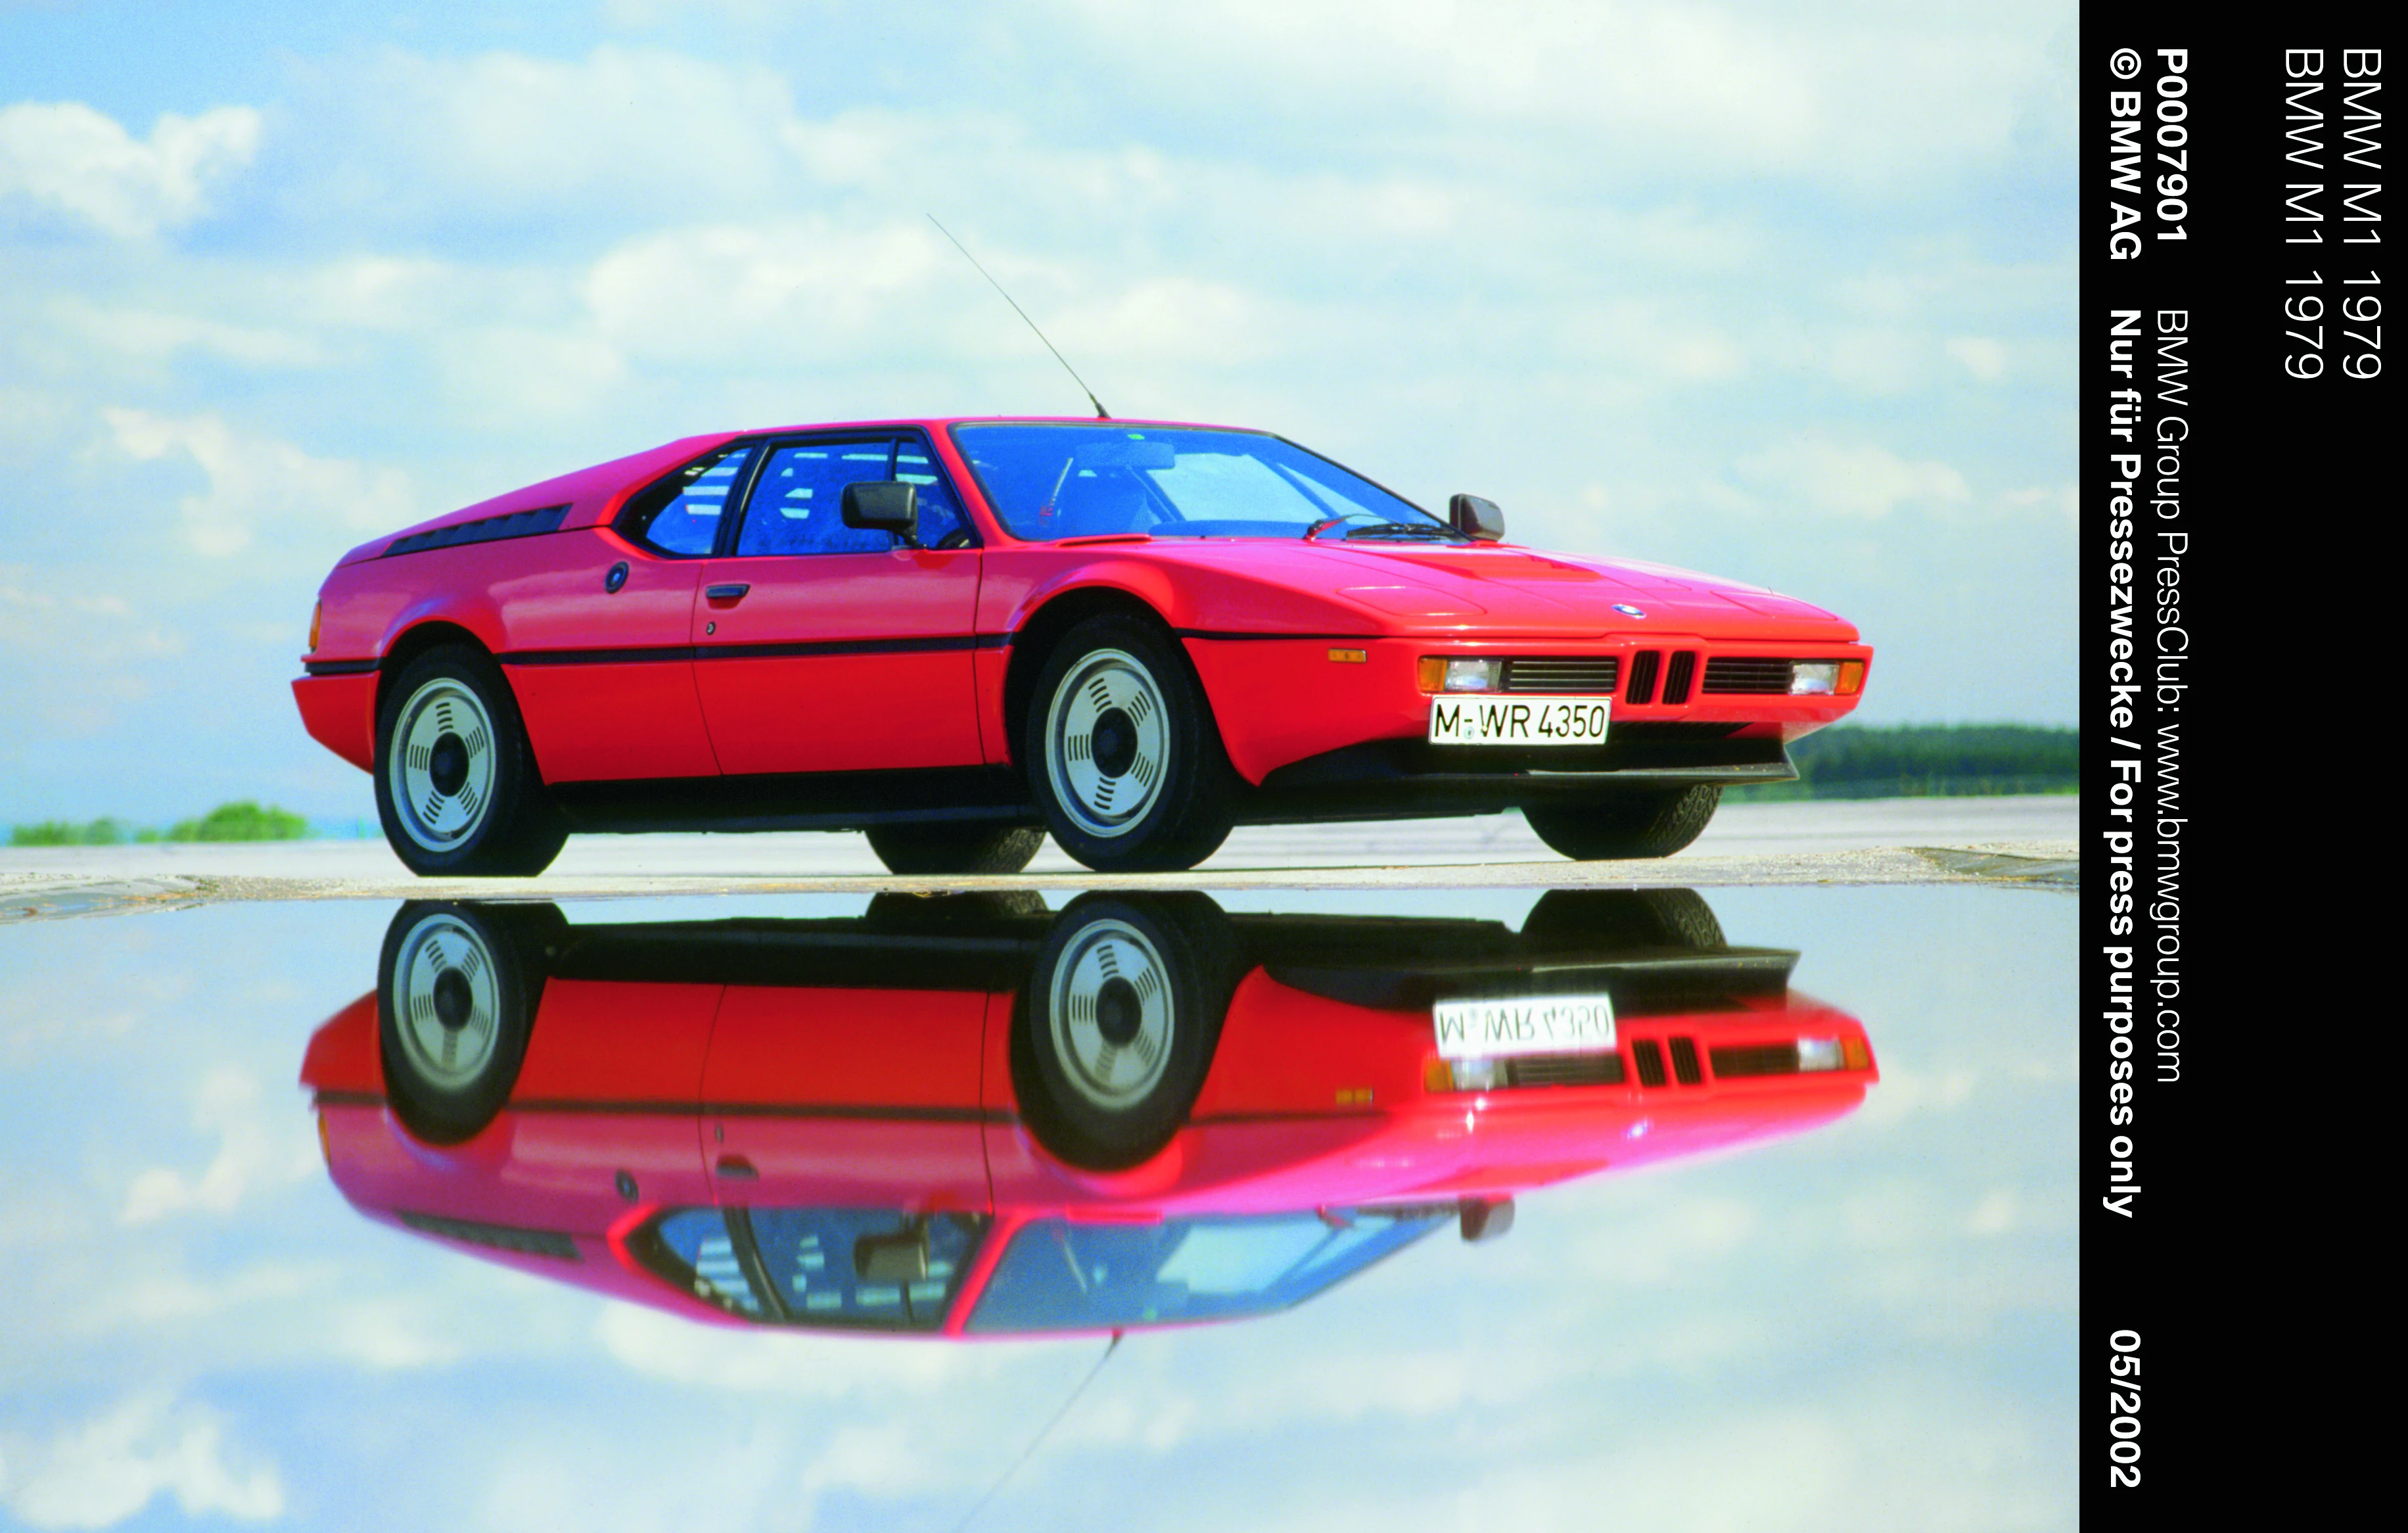 A BMW M1 like the one heading to Newcastle Motor Show